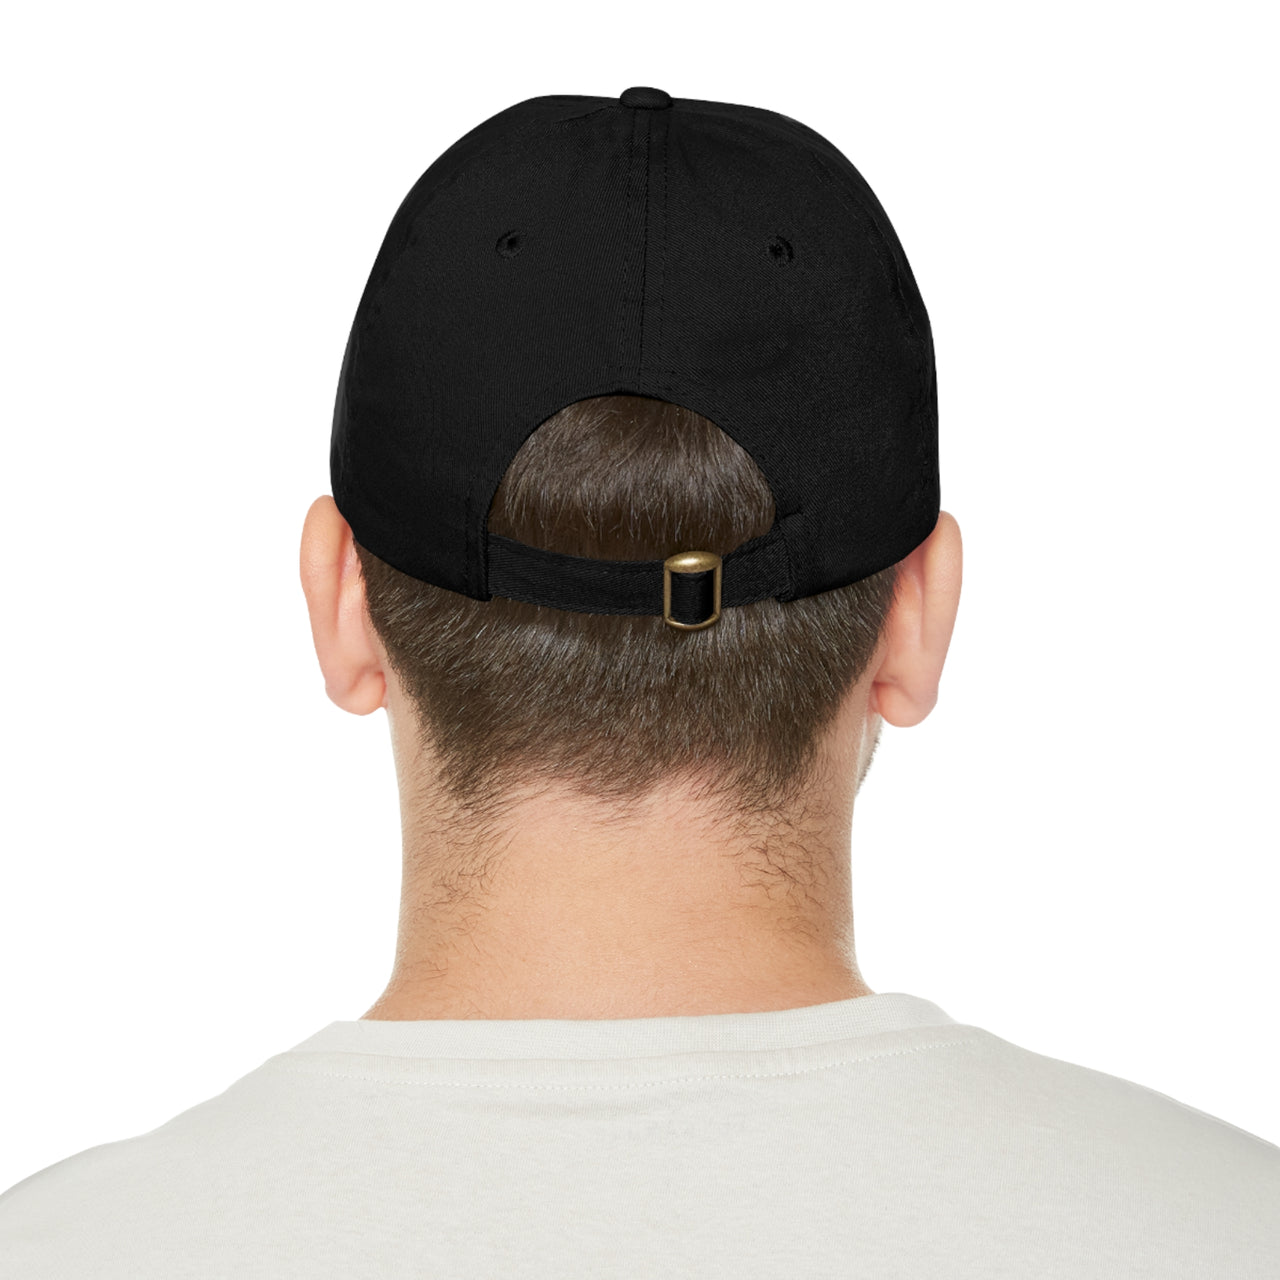 Barcelona Slogan Dad Hat with Leather Patch (Round)